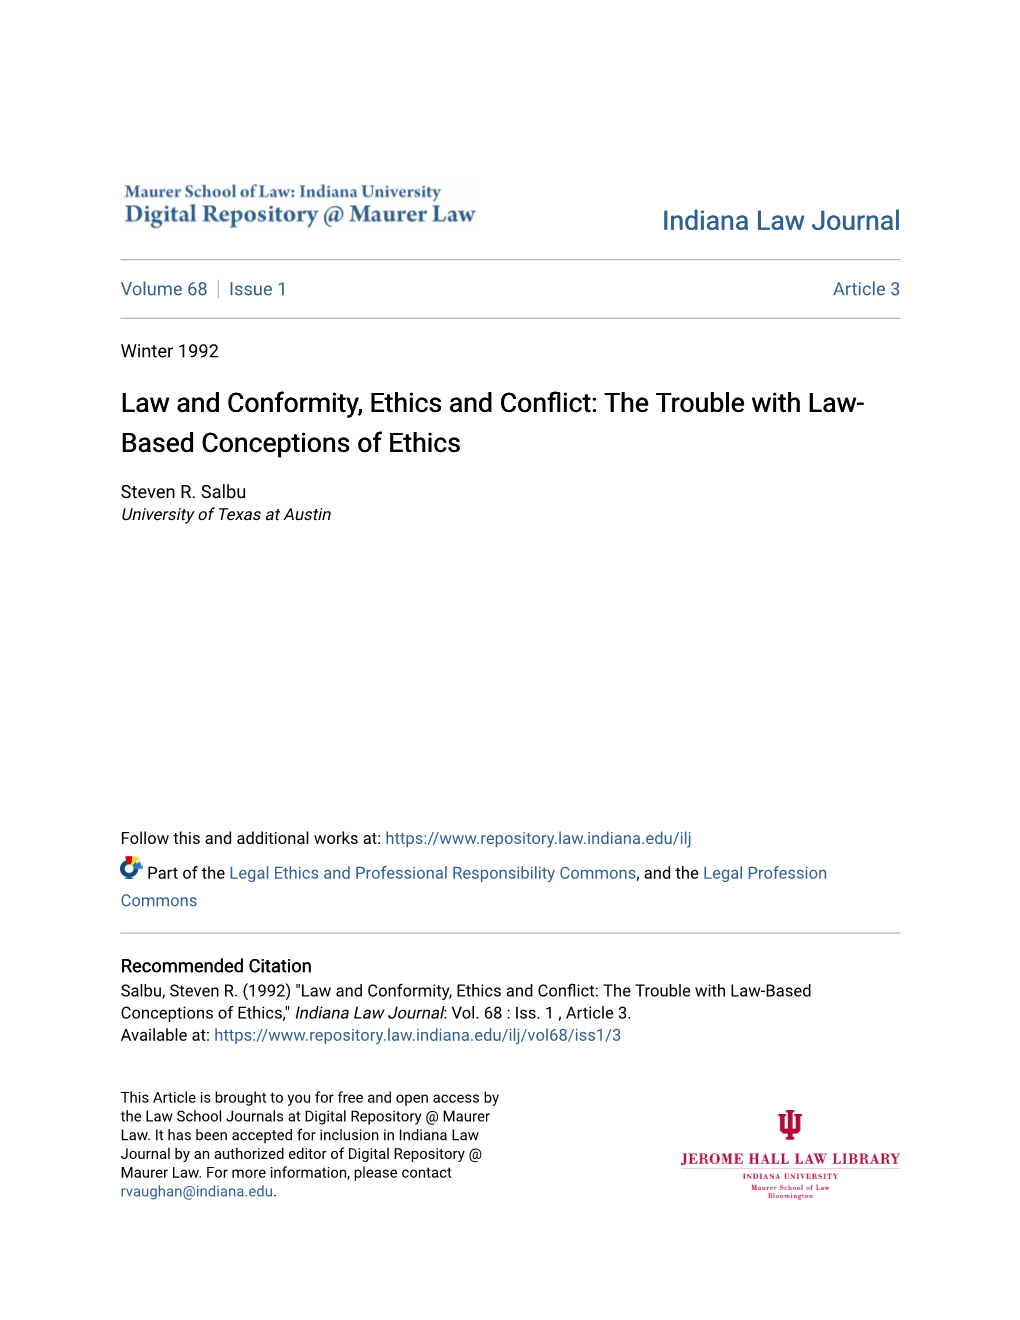 Law and Conformity, Ethics and Conflict: the Rt Ouble with Law- Based Conceptions of Ethics